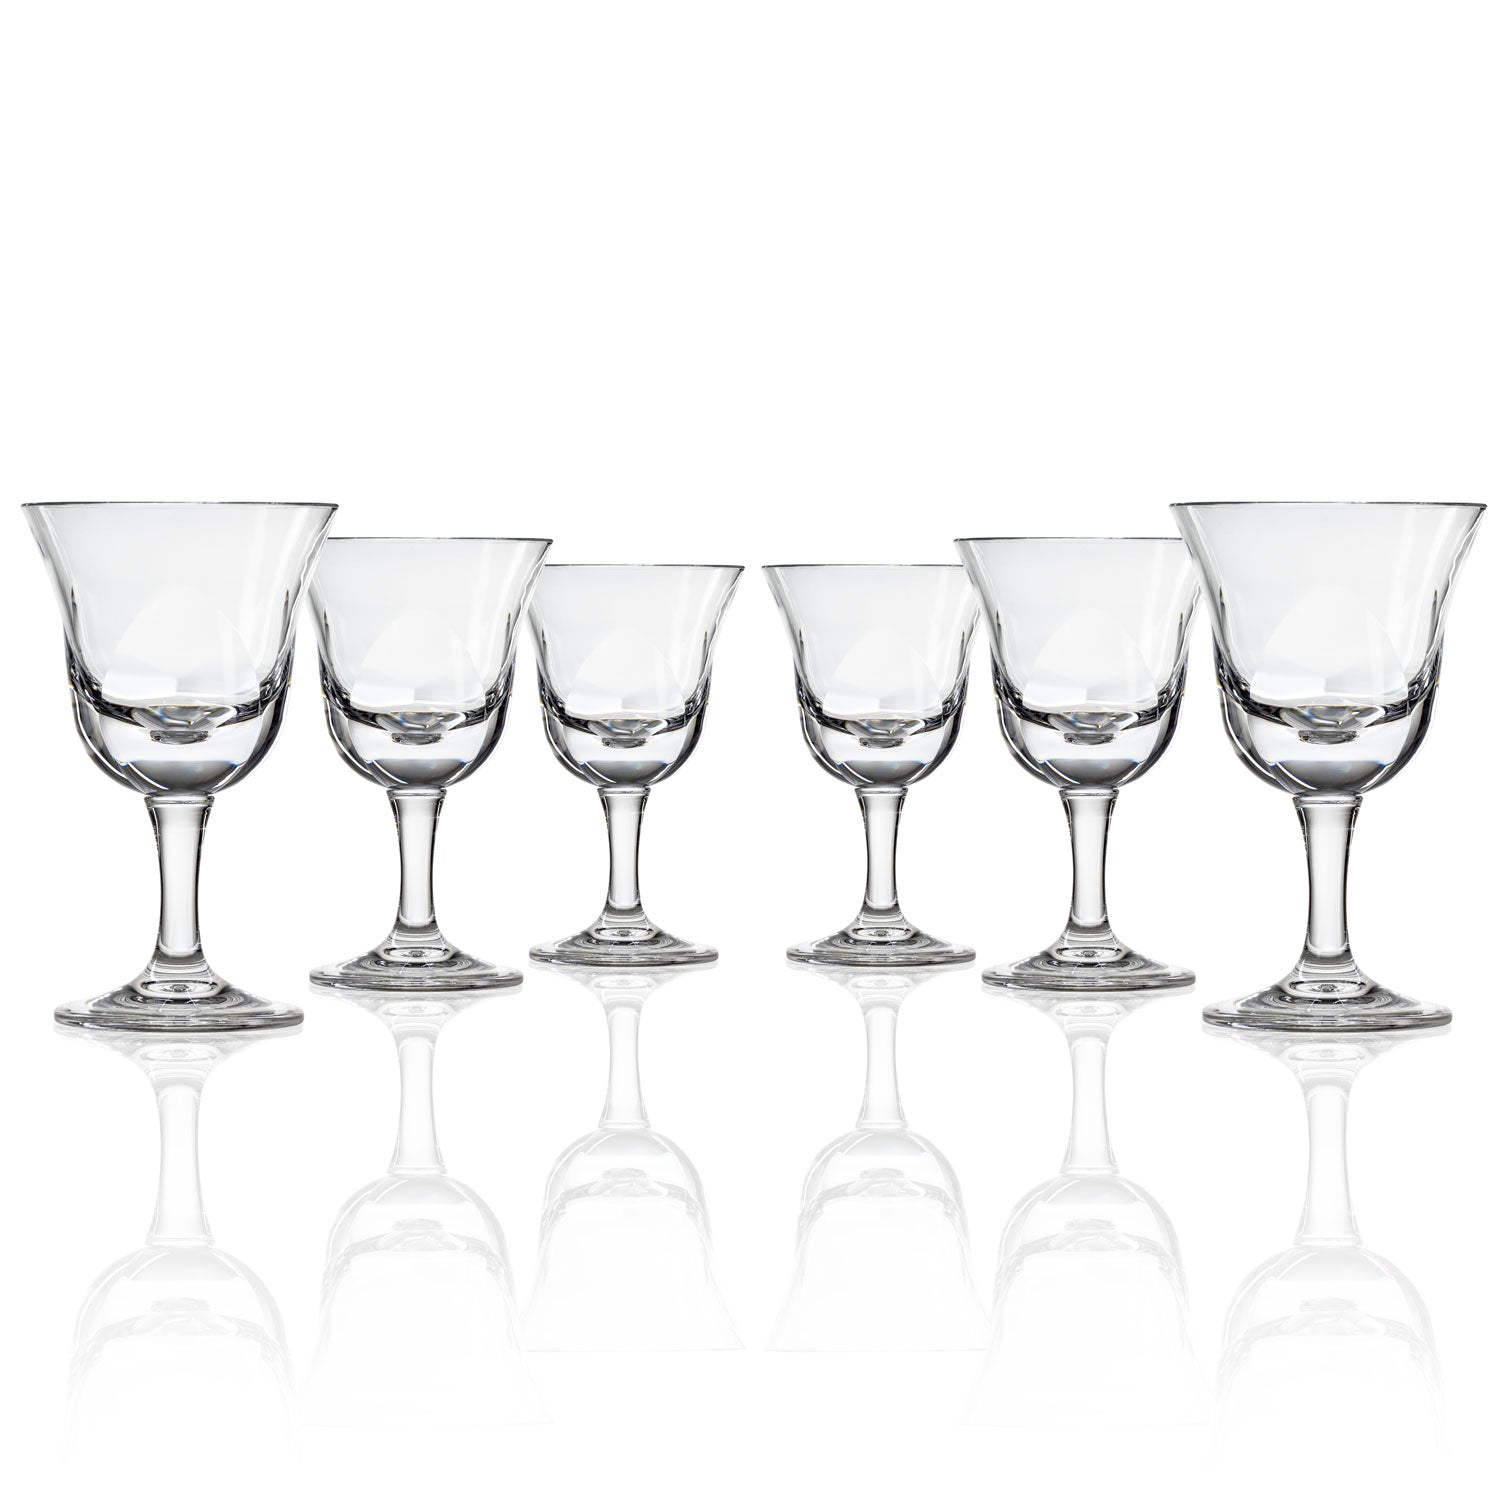 Set of 6, 10-ounce clear acrylic wine glasses in the Fiori collection by Merritt Designs. Front view on white background